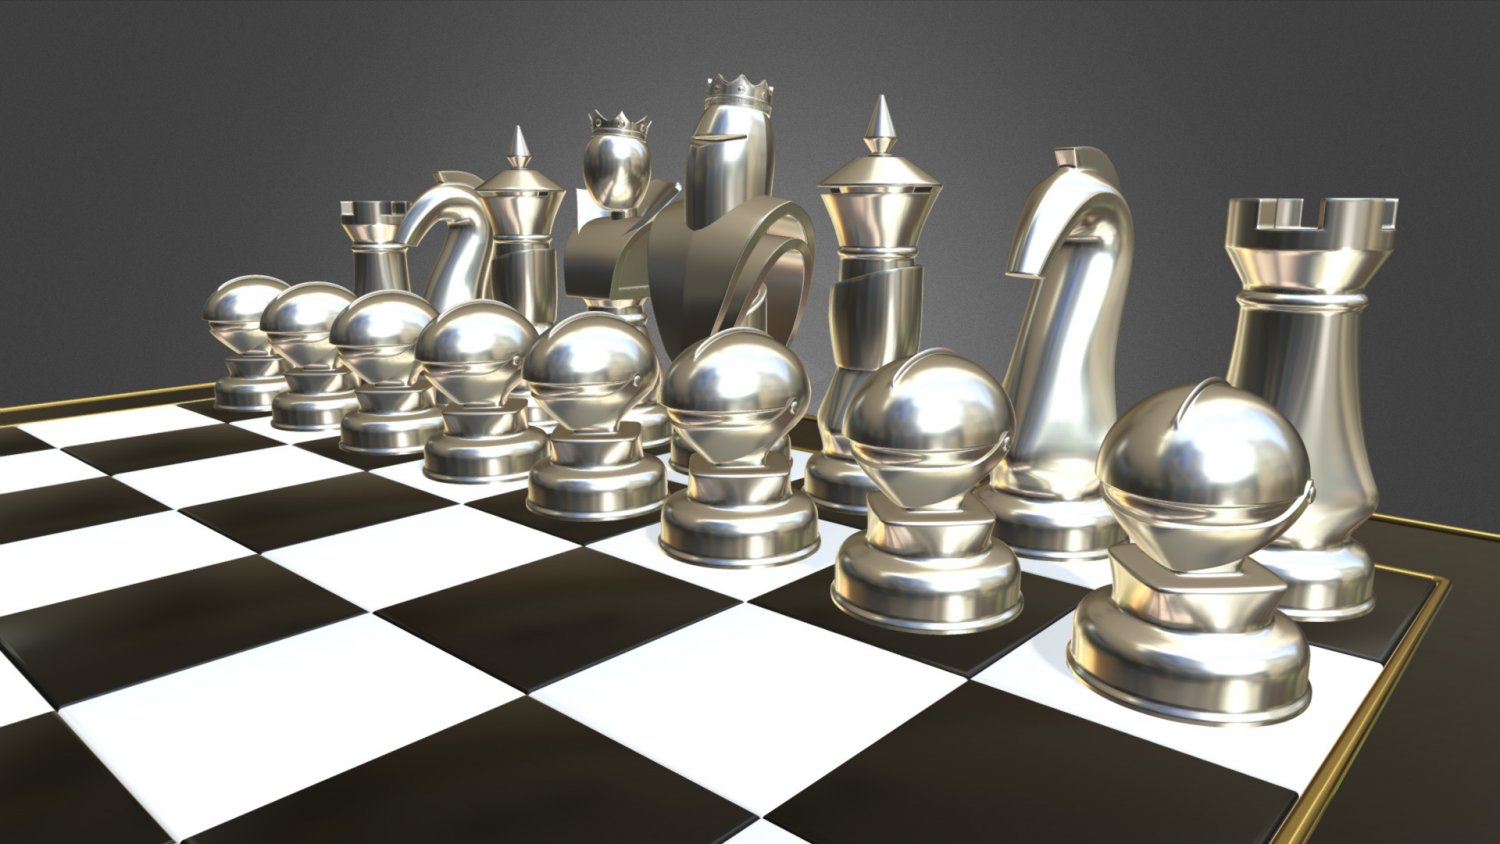 Download wallpapers 3d chess, silver metal chess, chessboard, intellectual  games for desktop free. Pictures for desktop free